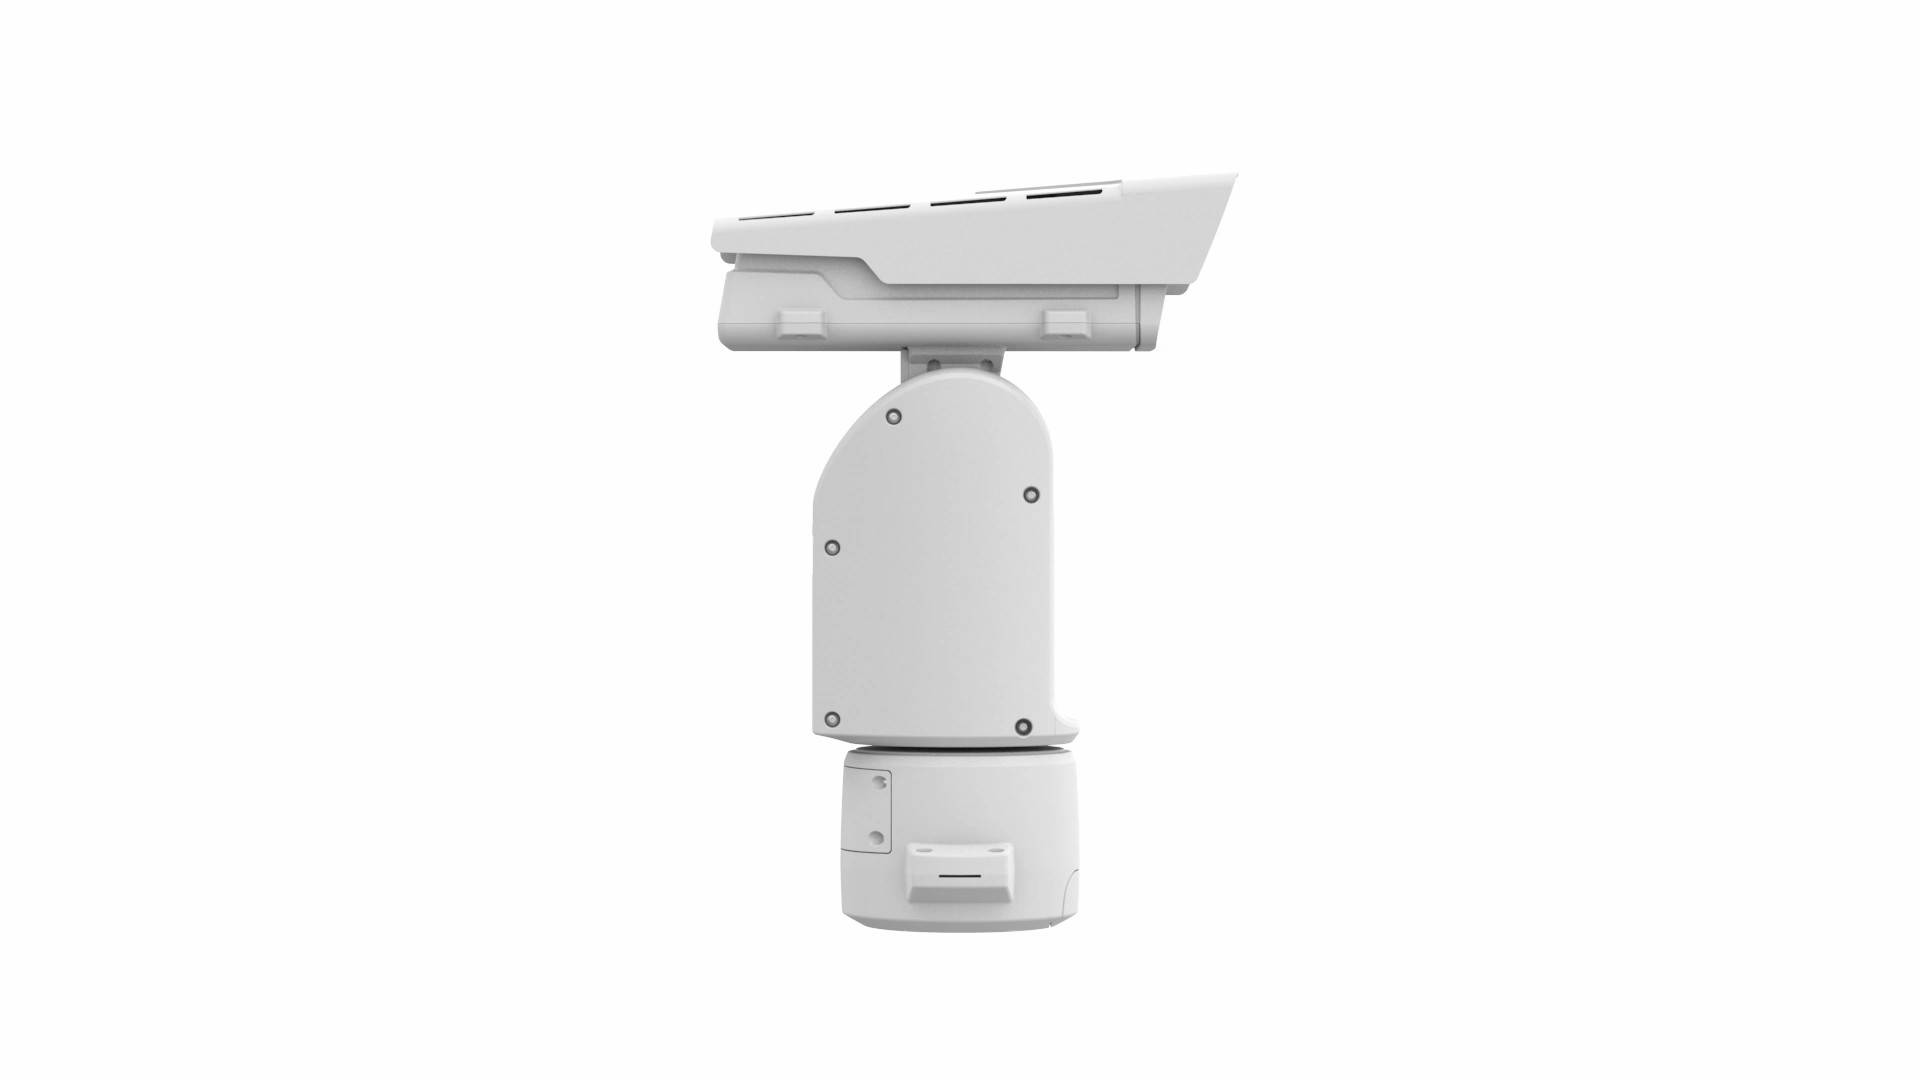 AXIS Q8685-E PTZ Network Camera - Product support | Axis 